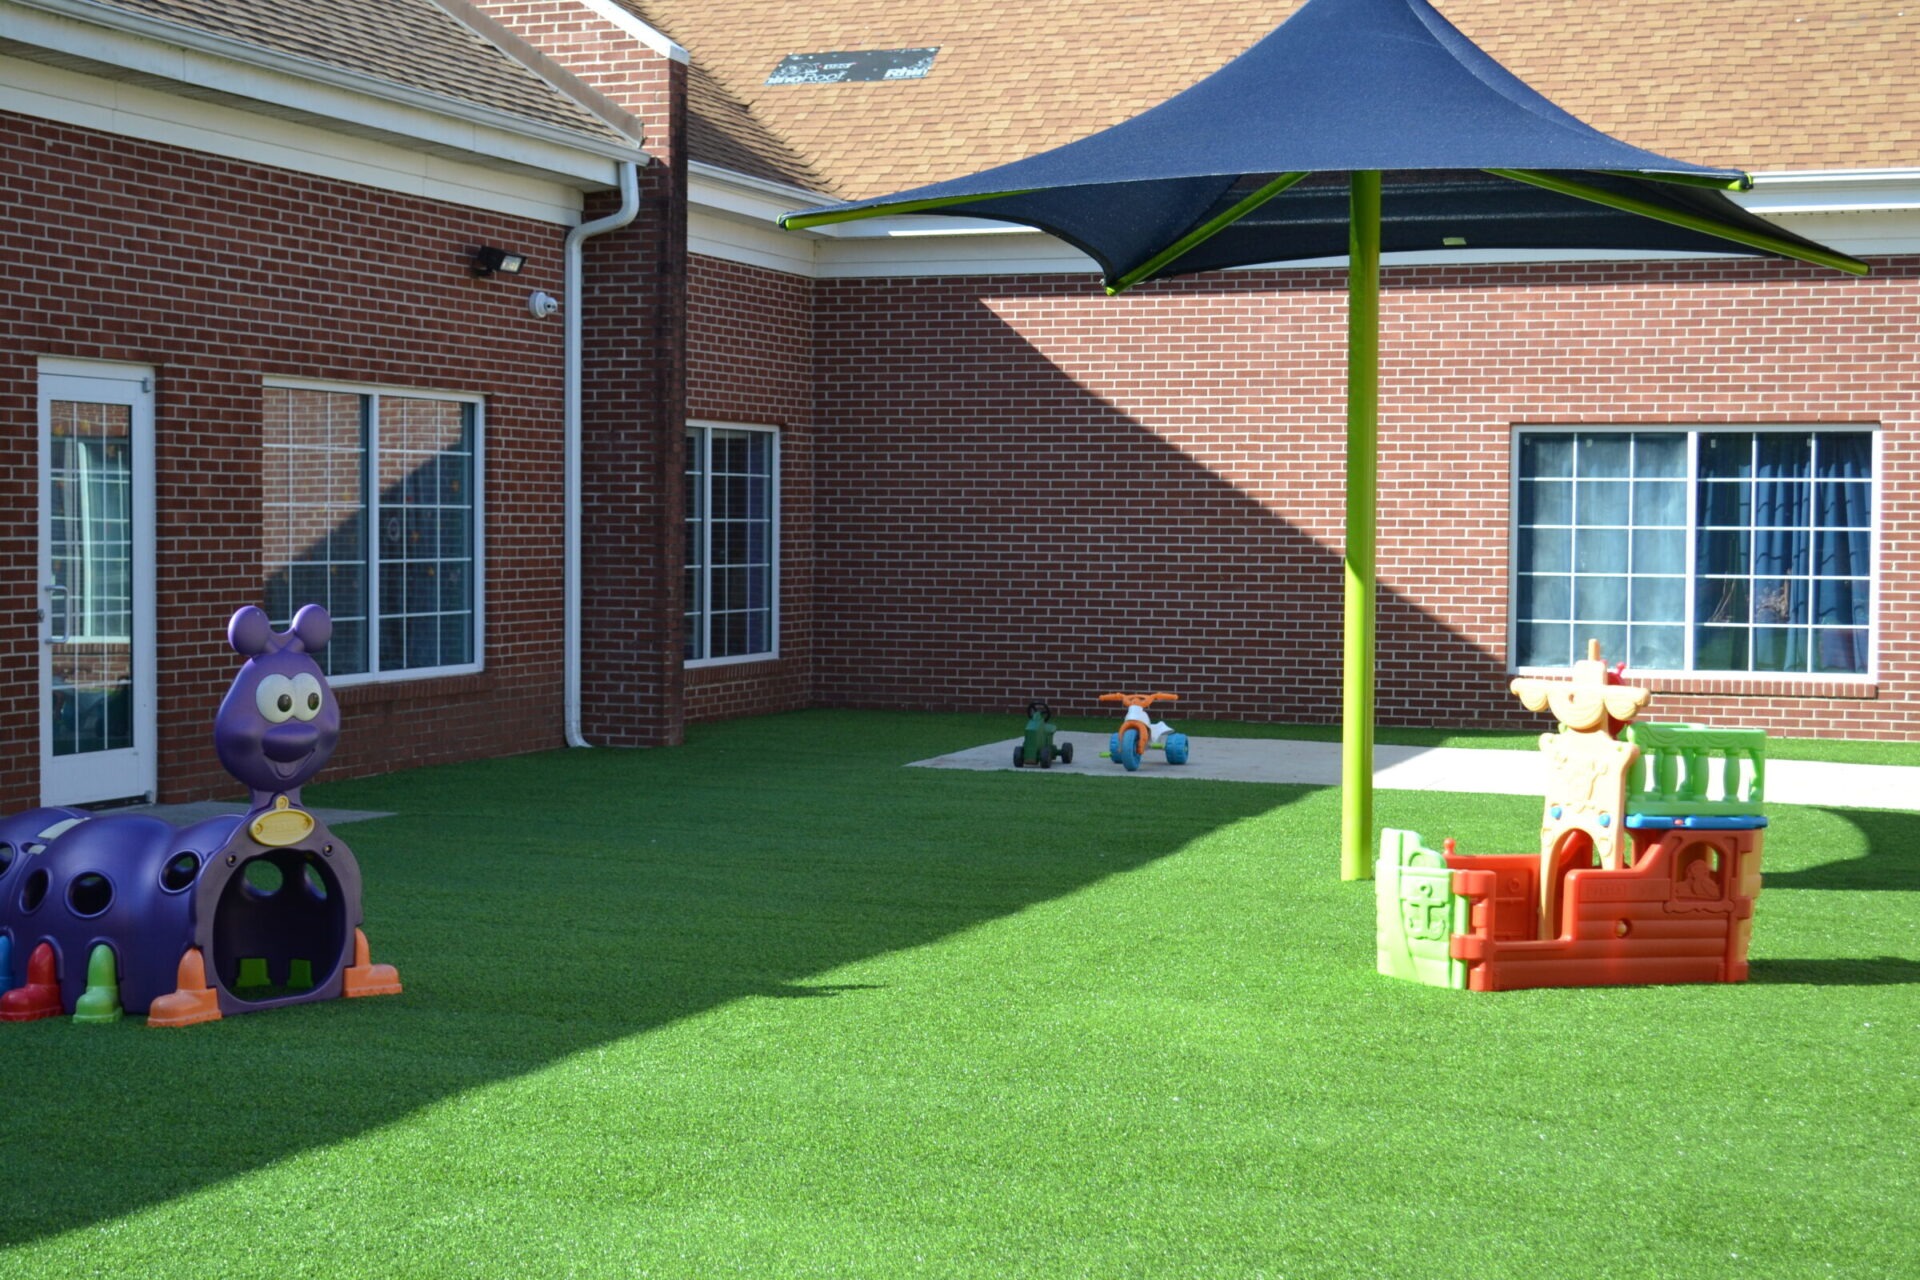 A playground with artificial grass features colorful play structures, including a purple caterpillar and a sunshade, against a brick building backdrop. No people visible.